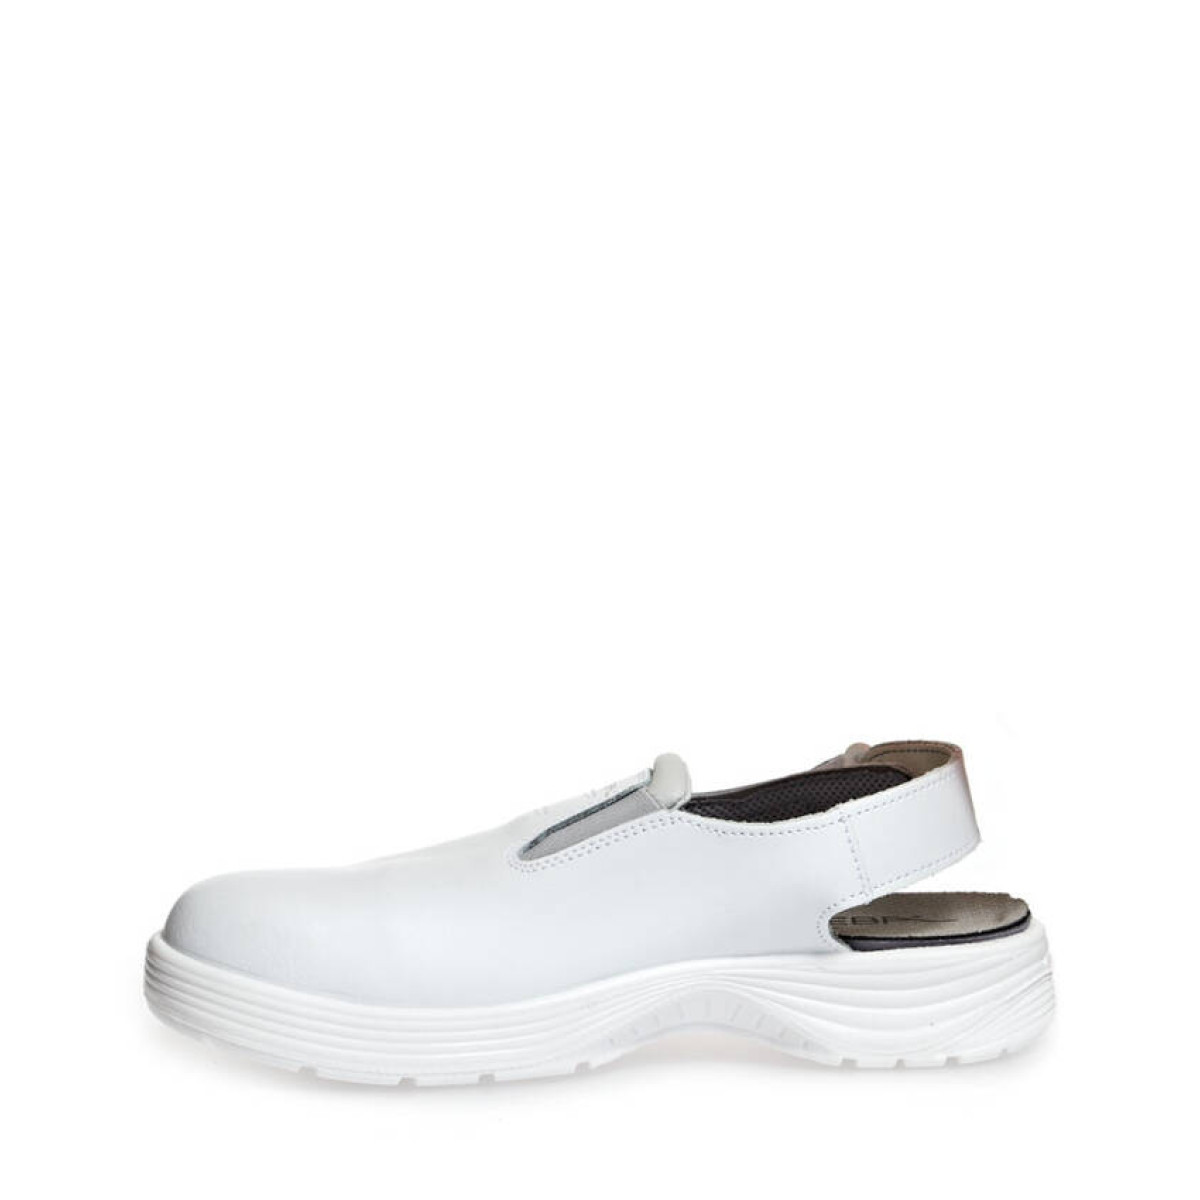 Color:white with steel cap, Size:47